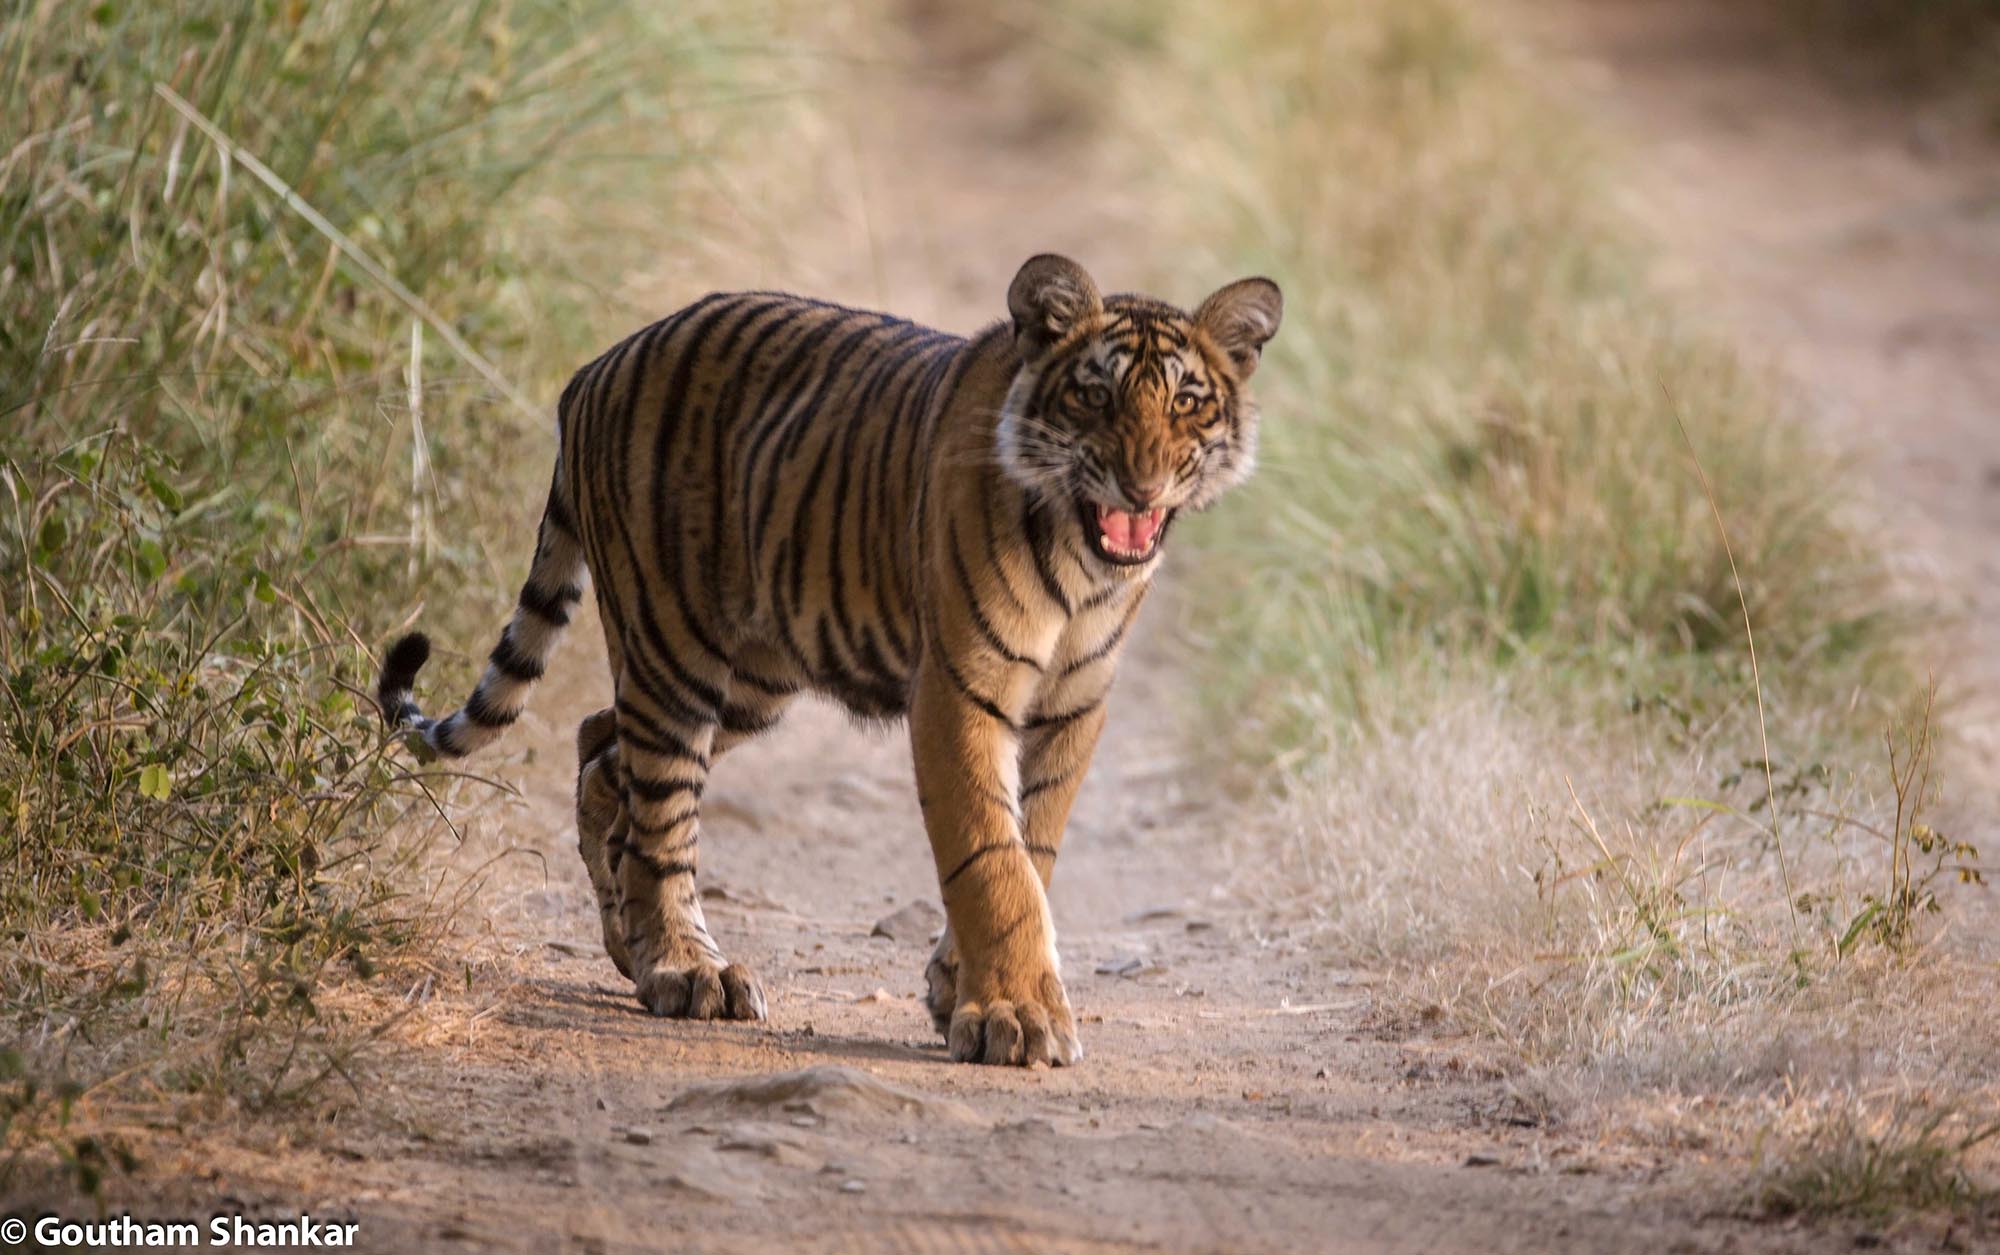 Cub2 of T19 in Ranthambore, Rajasthan